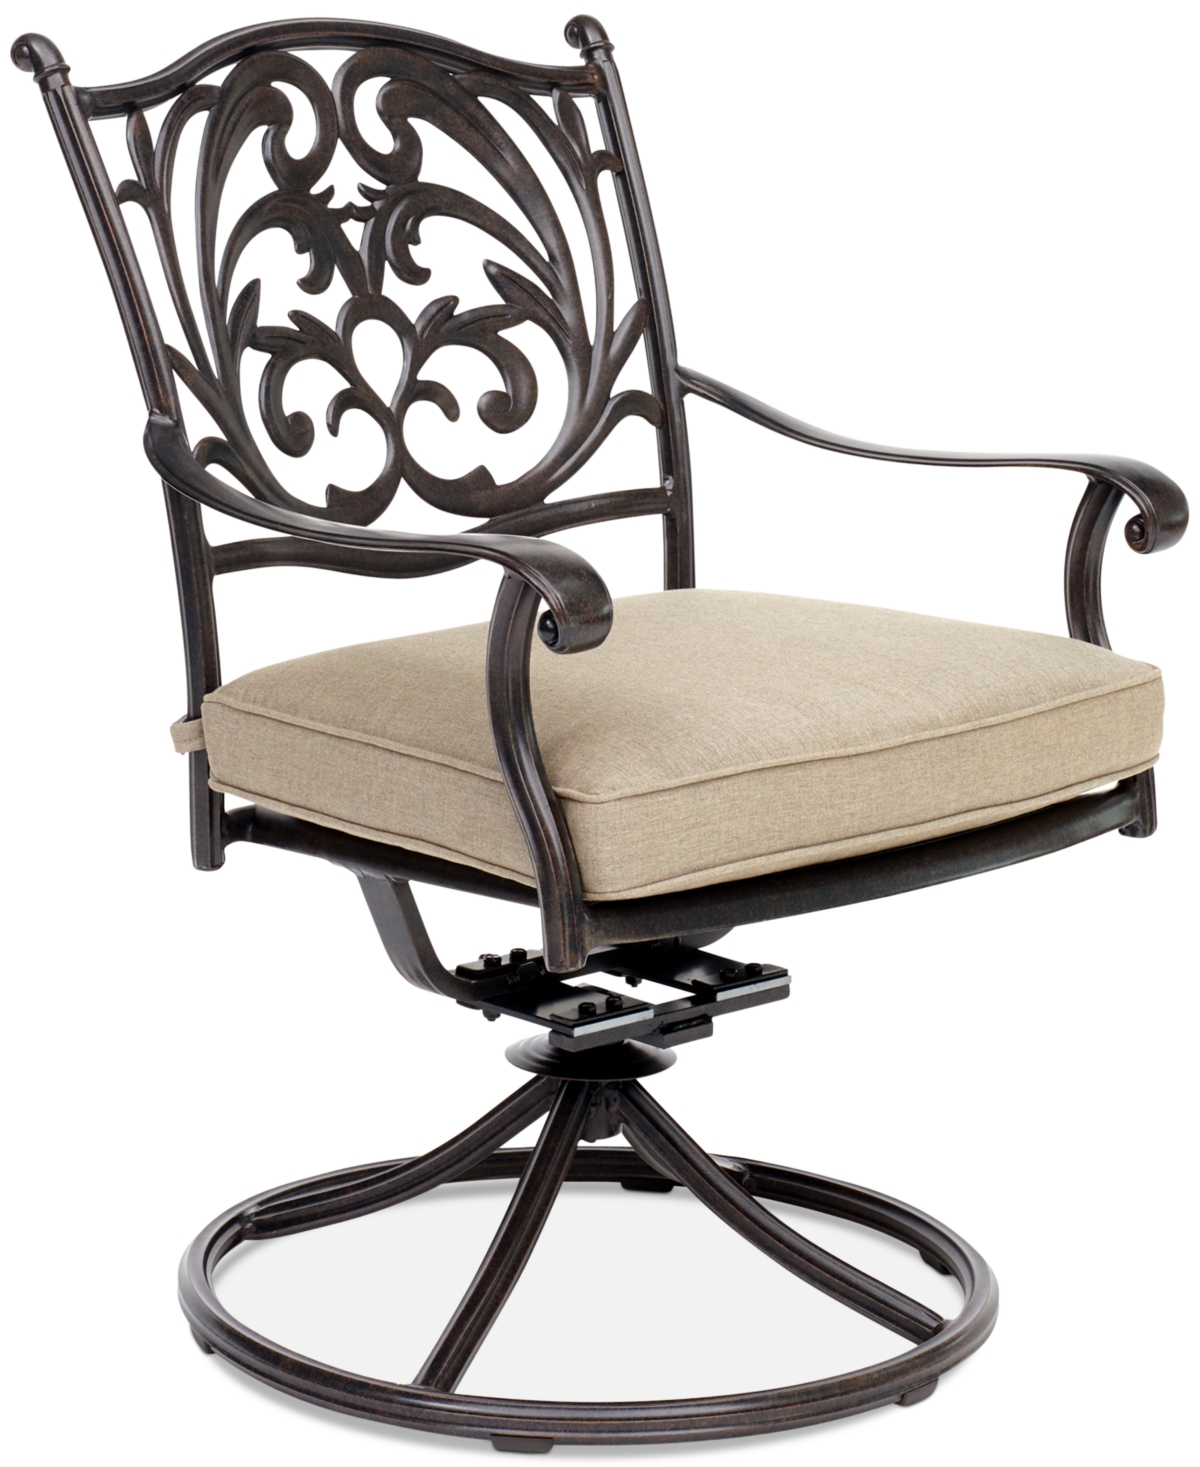 Agio Set Of 4 Chateau Aluminum Outdoor Dining Swivel Rockers With Outdoor Cushion, Created For Macy's In Sunbrella Cast Shale